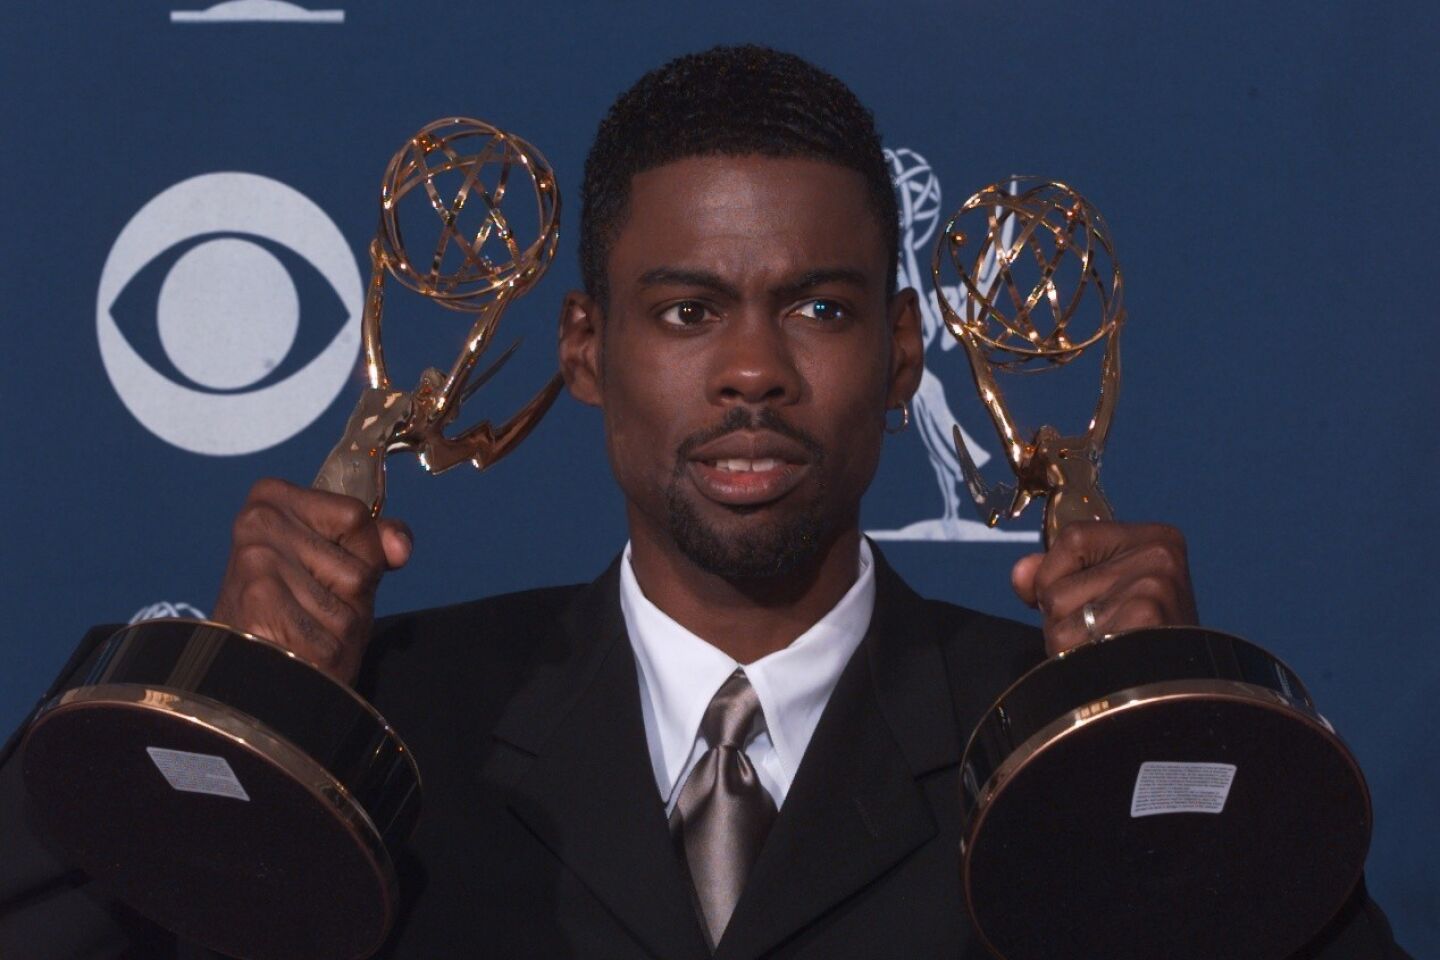 Chris Rock close to returning as Oscar host? Los Angeles Times